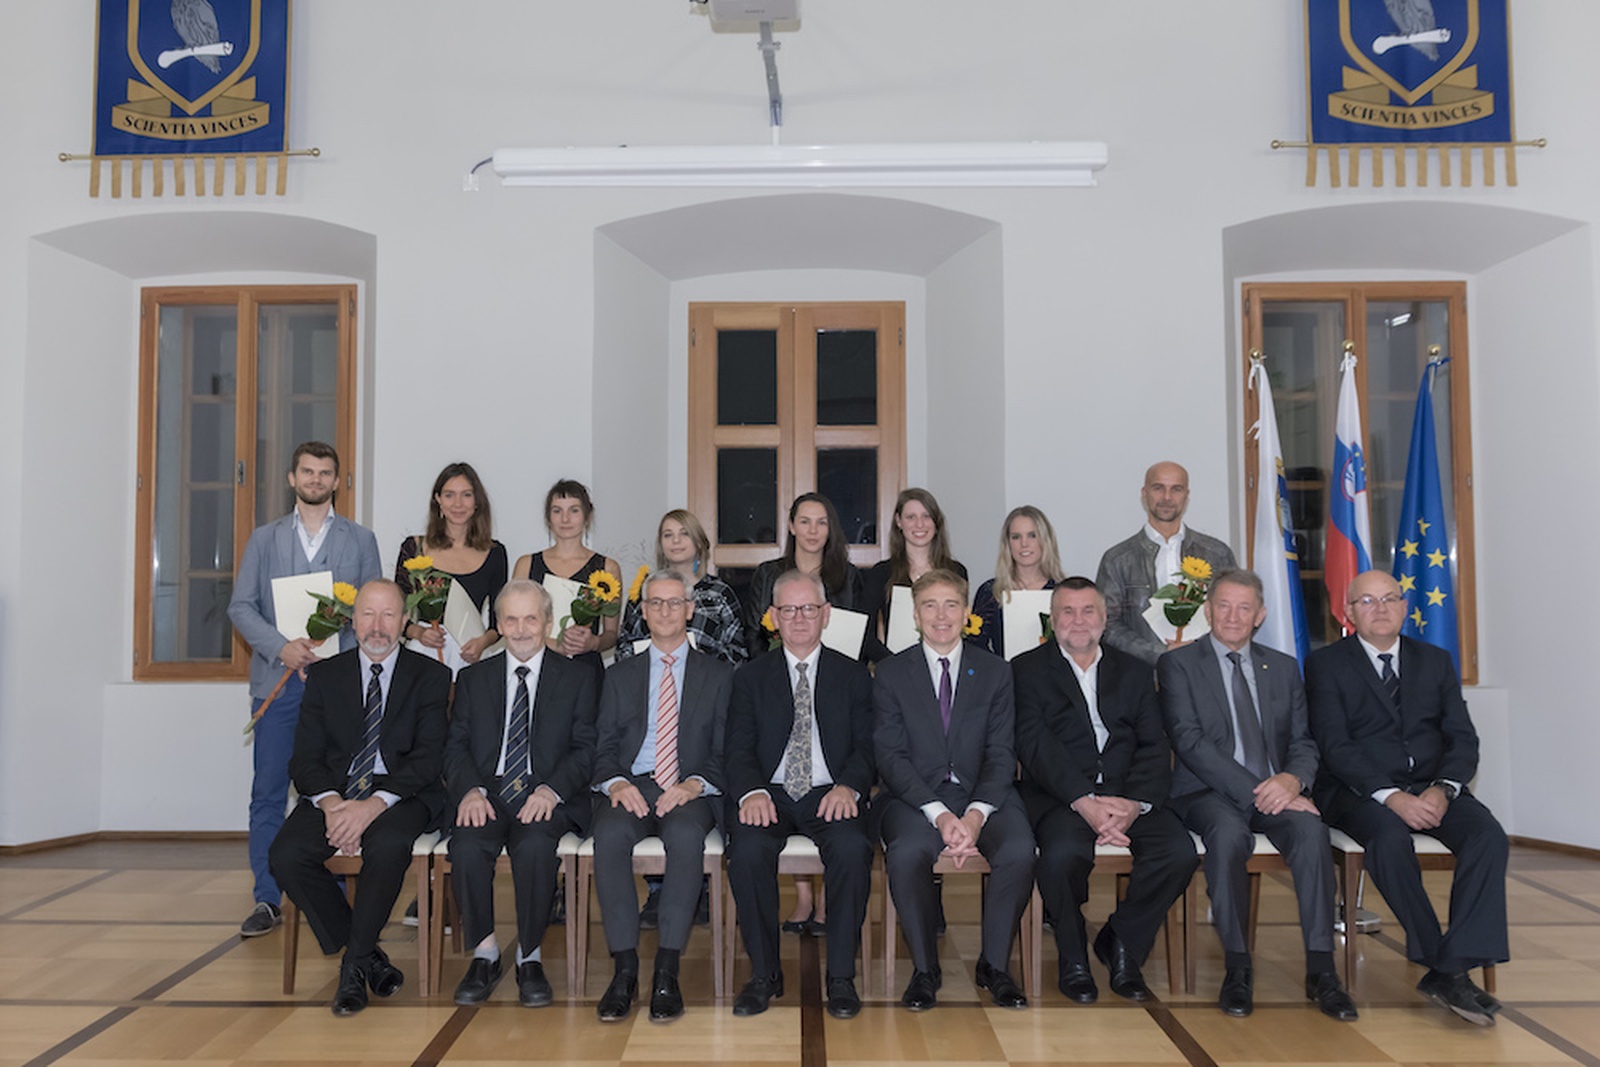 Awardees, Administration of the University of Nova Gorica,  Minister for Education, Science and Sports Dr. Jernej Pikalo and President of the Slovenian Academy of Engineering Dr. Mark Pleško. Photo: Miha Godec